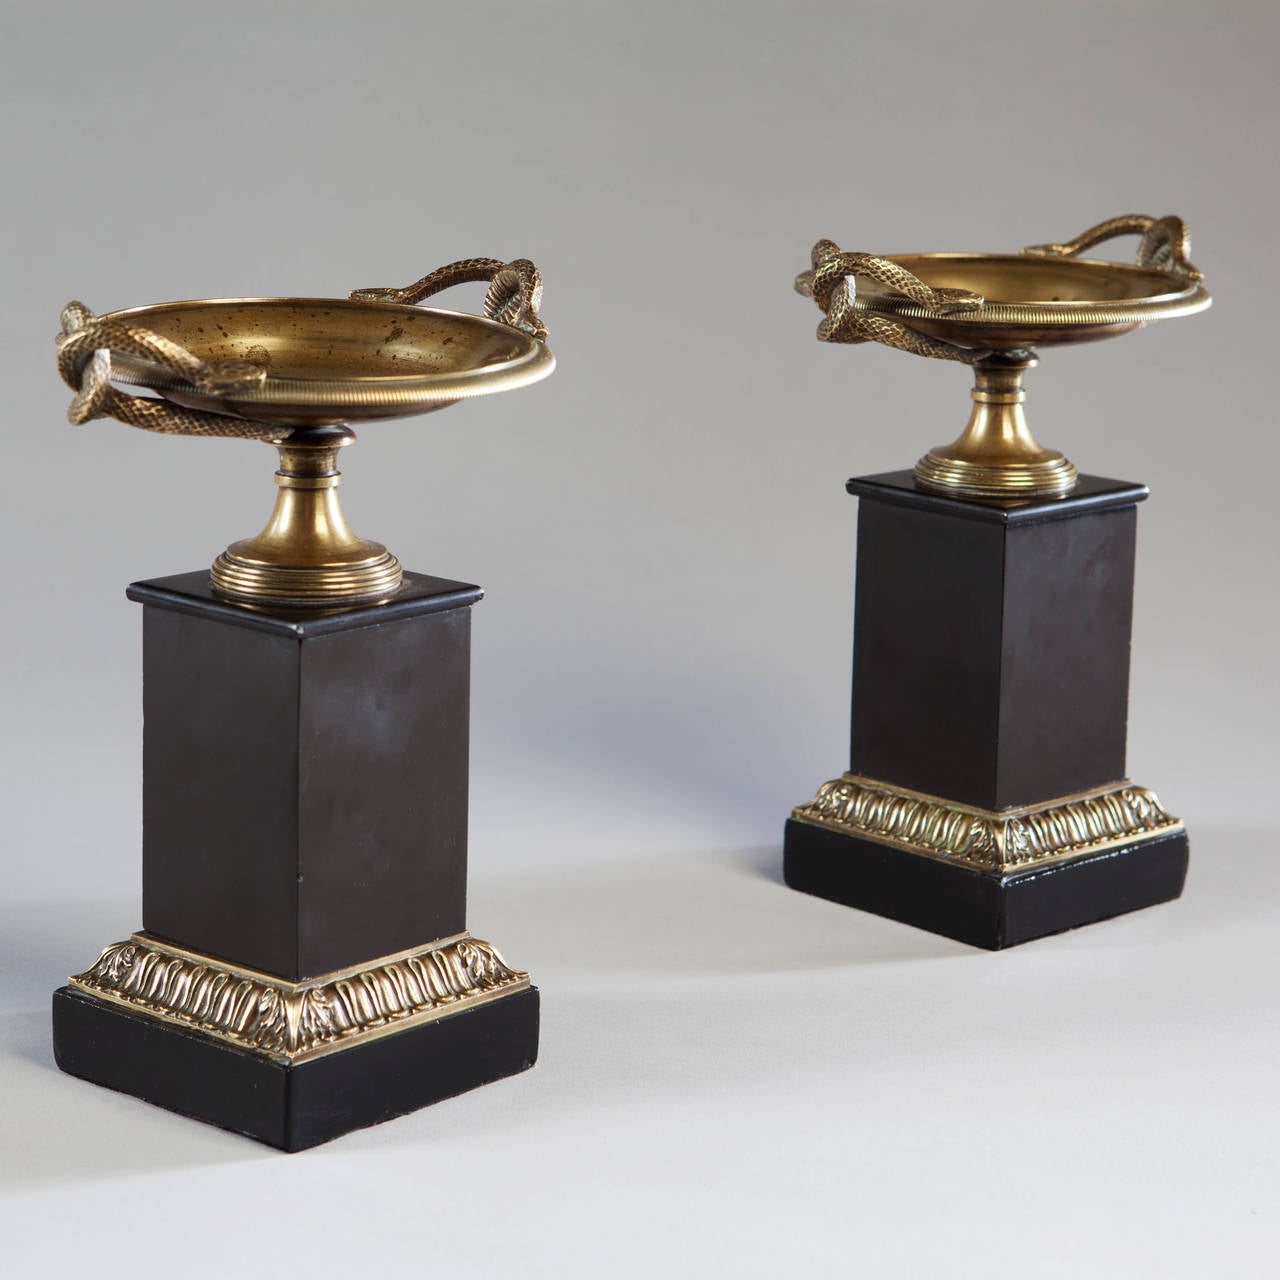 A pair of early nineteenth century bronze and black marble tazzas, the handles cast as serpents, raised on square section bronze mounted bases.